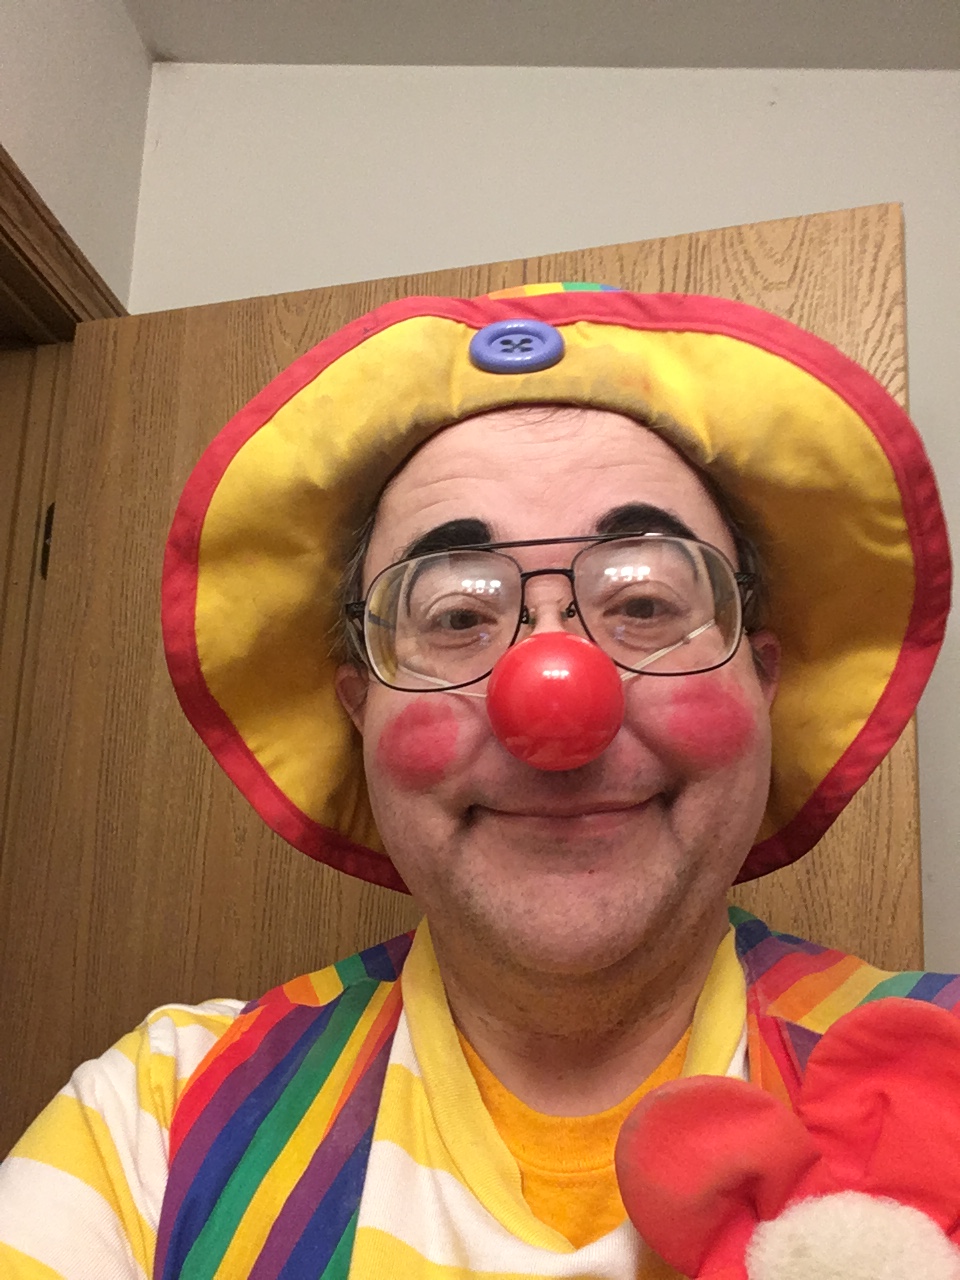 For those who don't know, today is my birthday! I'm turning (mumblety-mumble) years old. And, to celebrate, I'm donating my time to clown around at the Badger Childhood Cancer Network Holiday Party 2018.